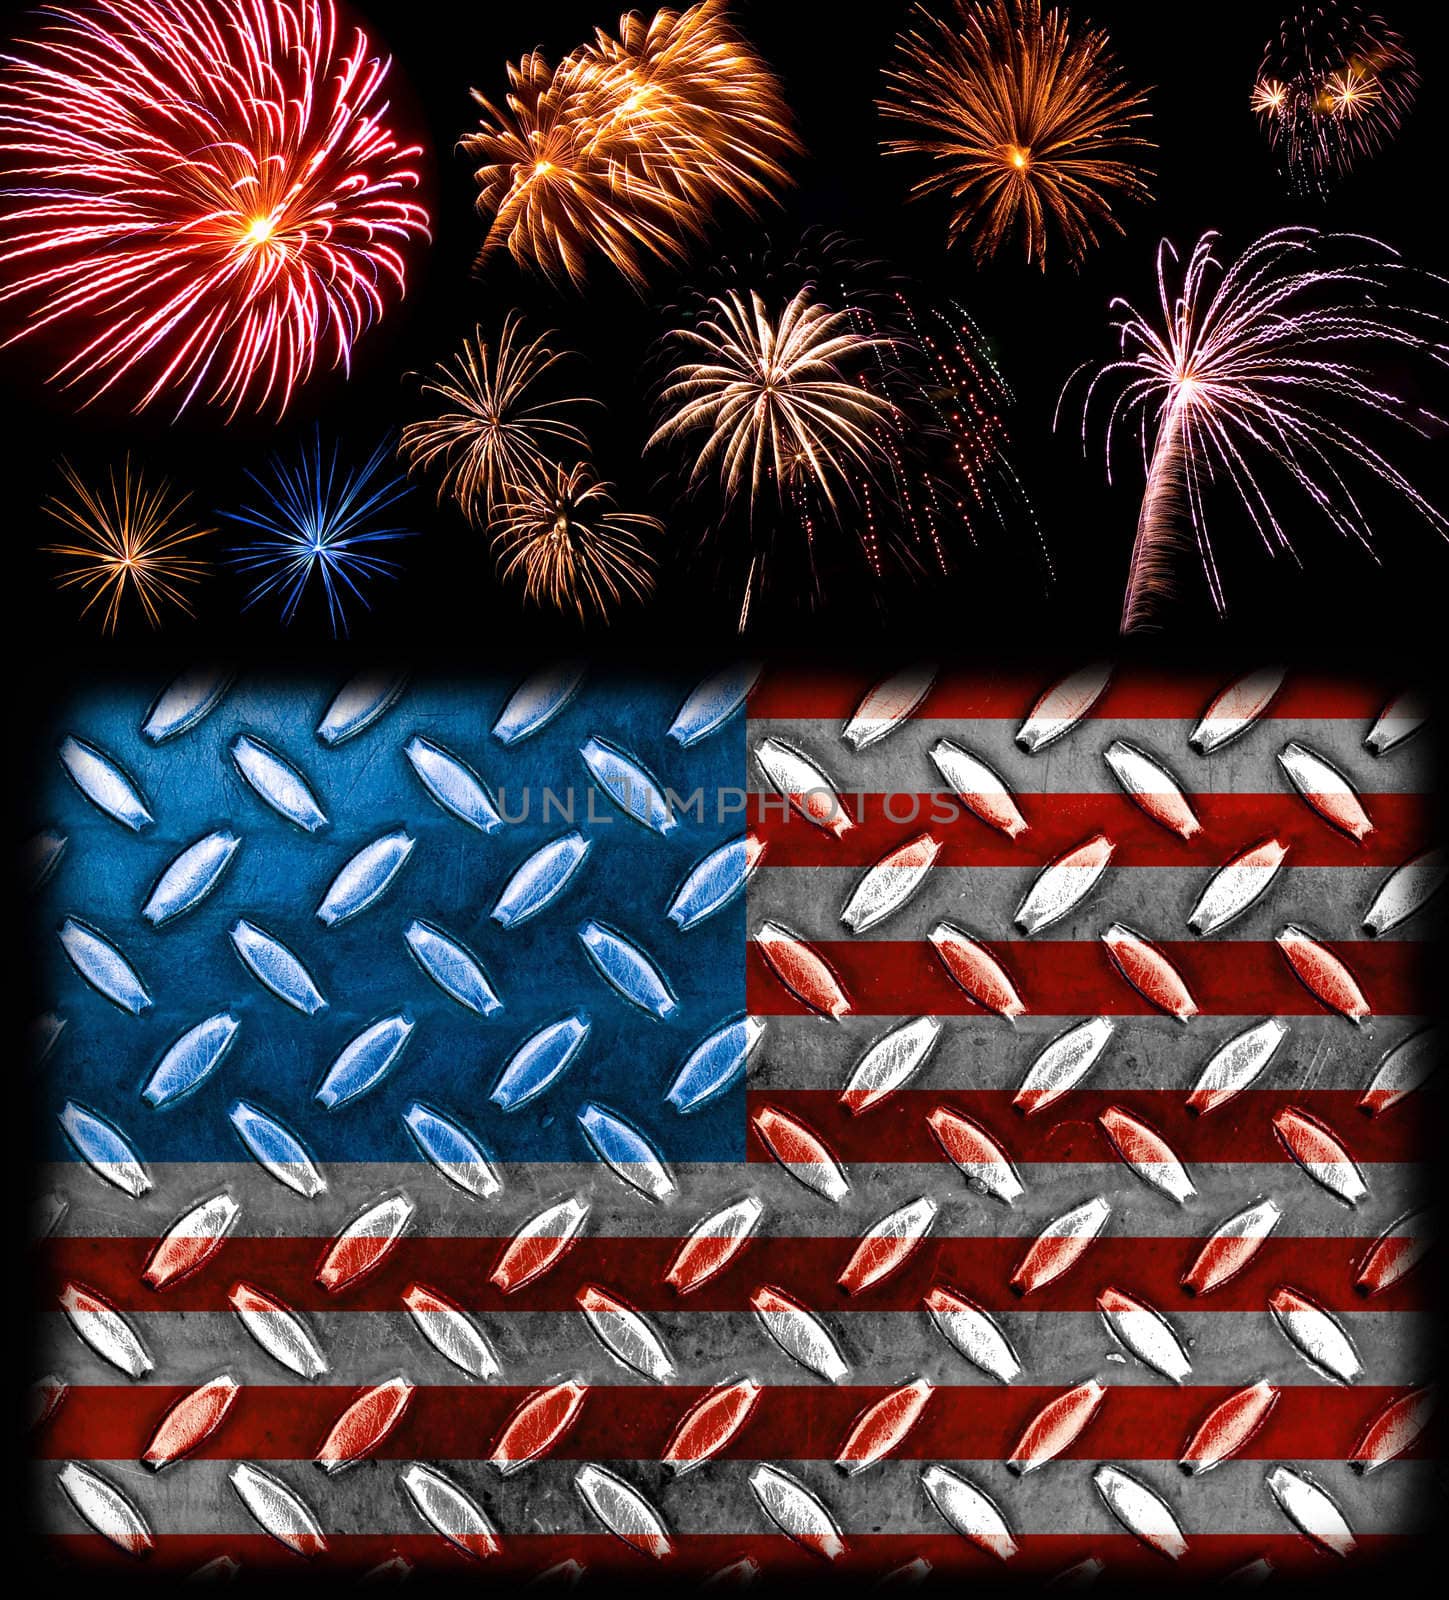 Fireworks in the Bckground of a Steel Plated American Flag